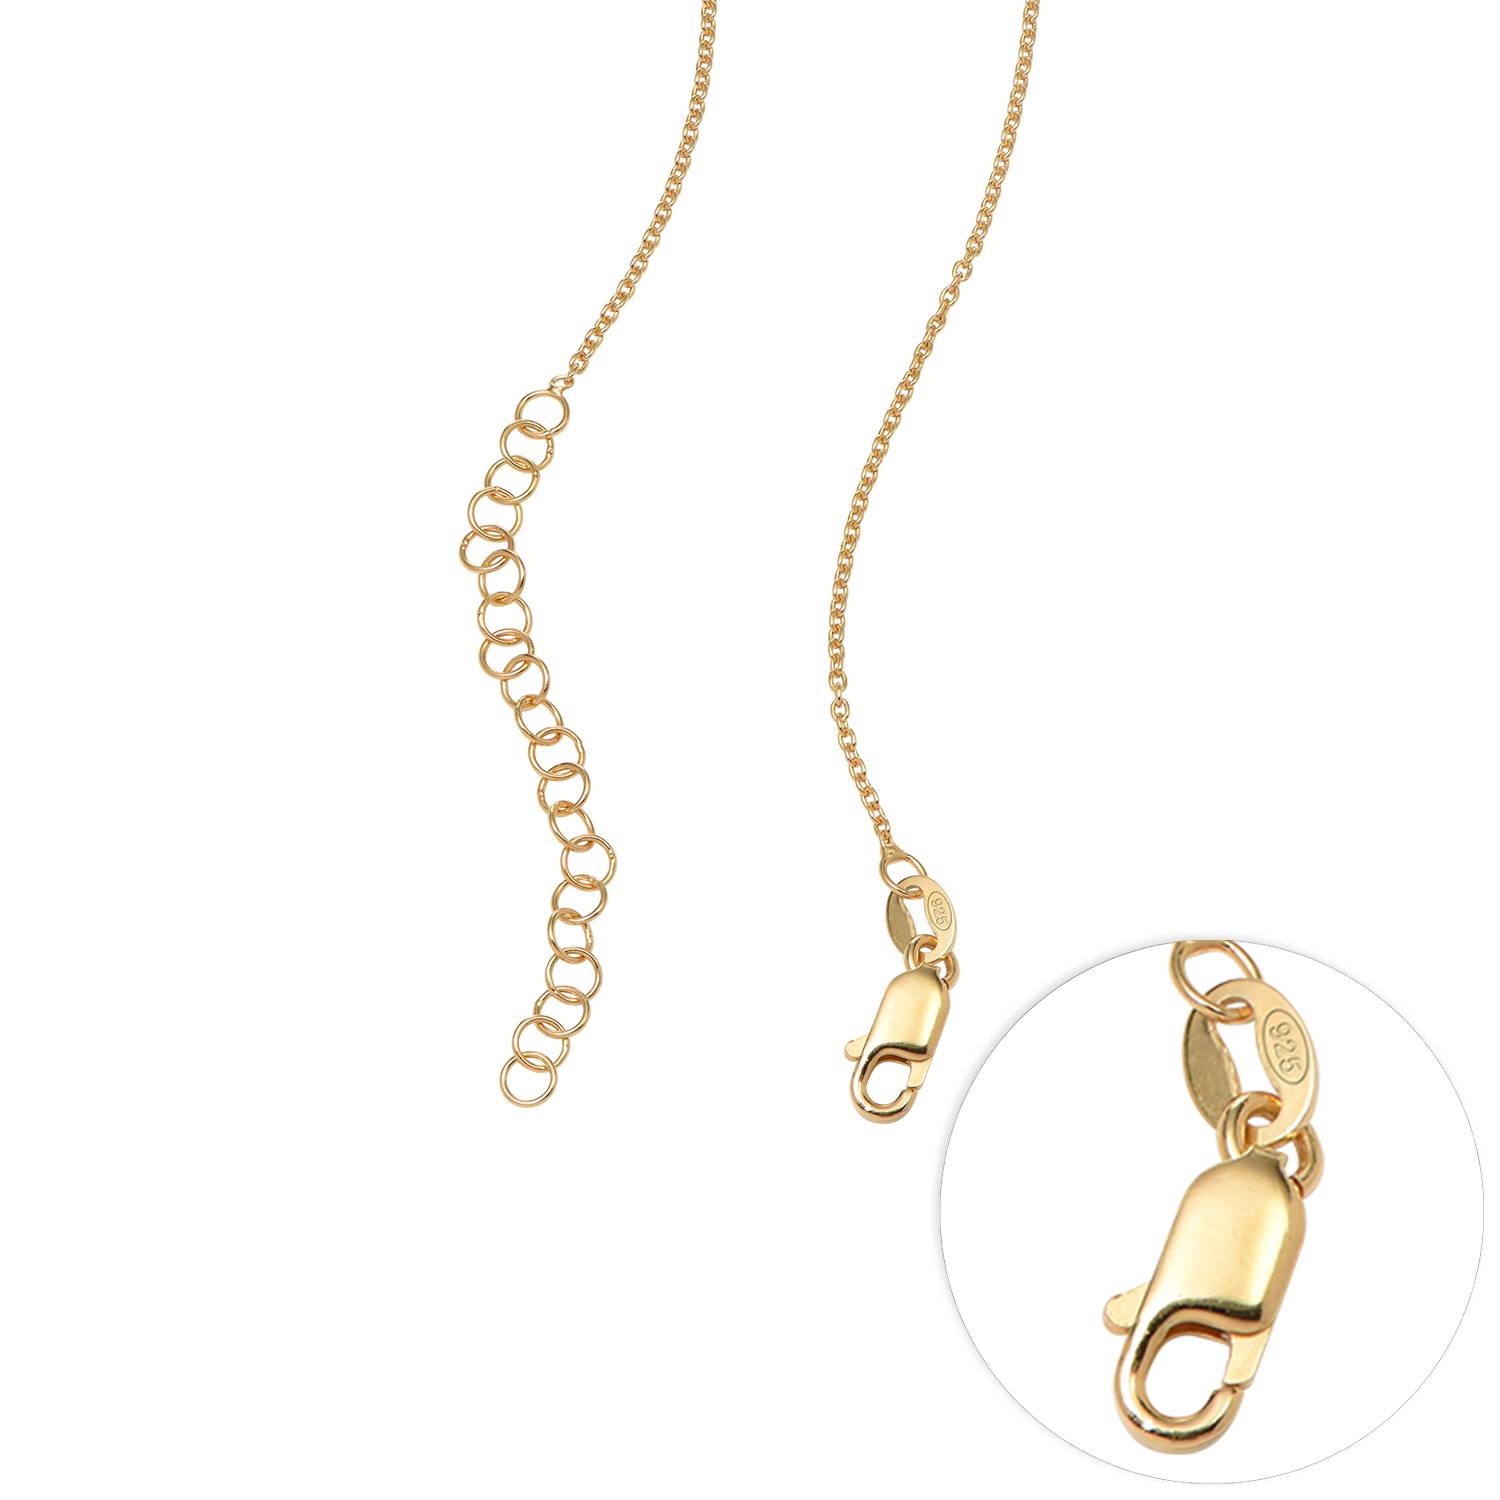 Infinity Name Necklace Gold Plated with Diamond-3 product photo